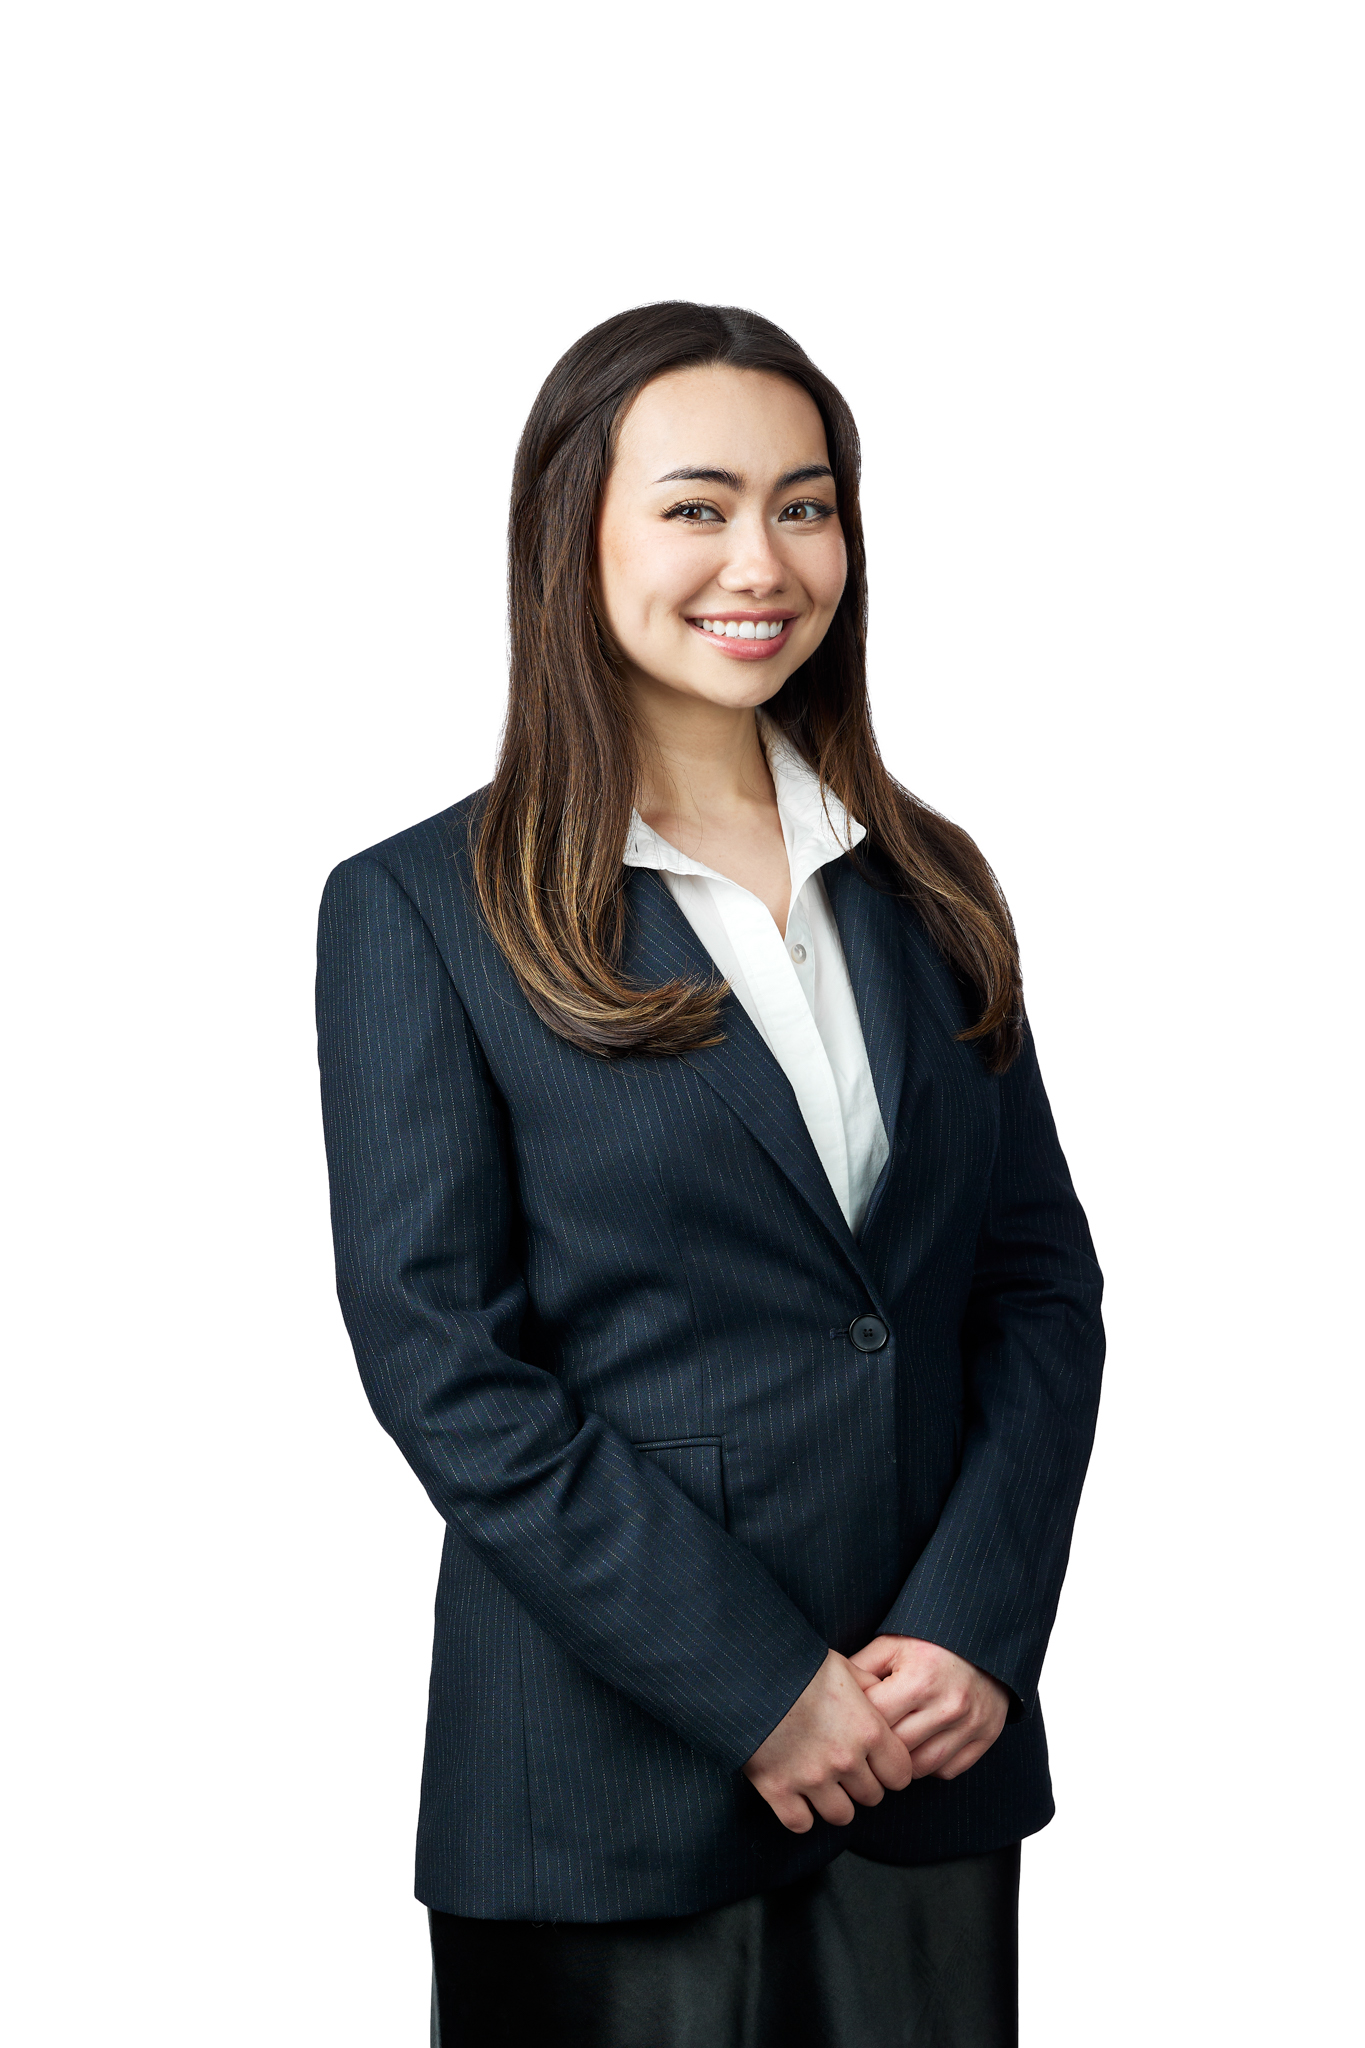 A woman in a business suit posing for event photography.